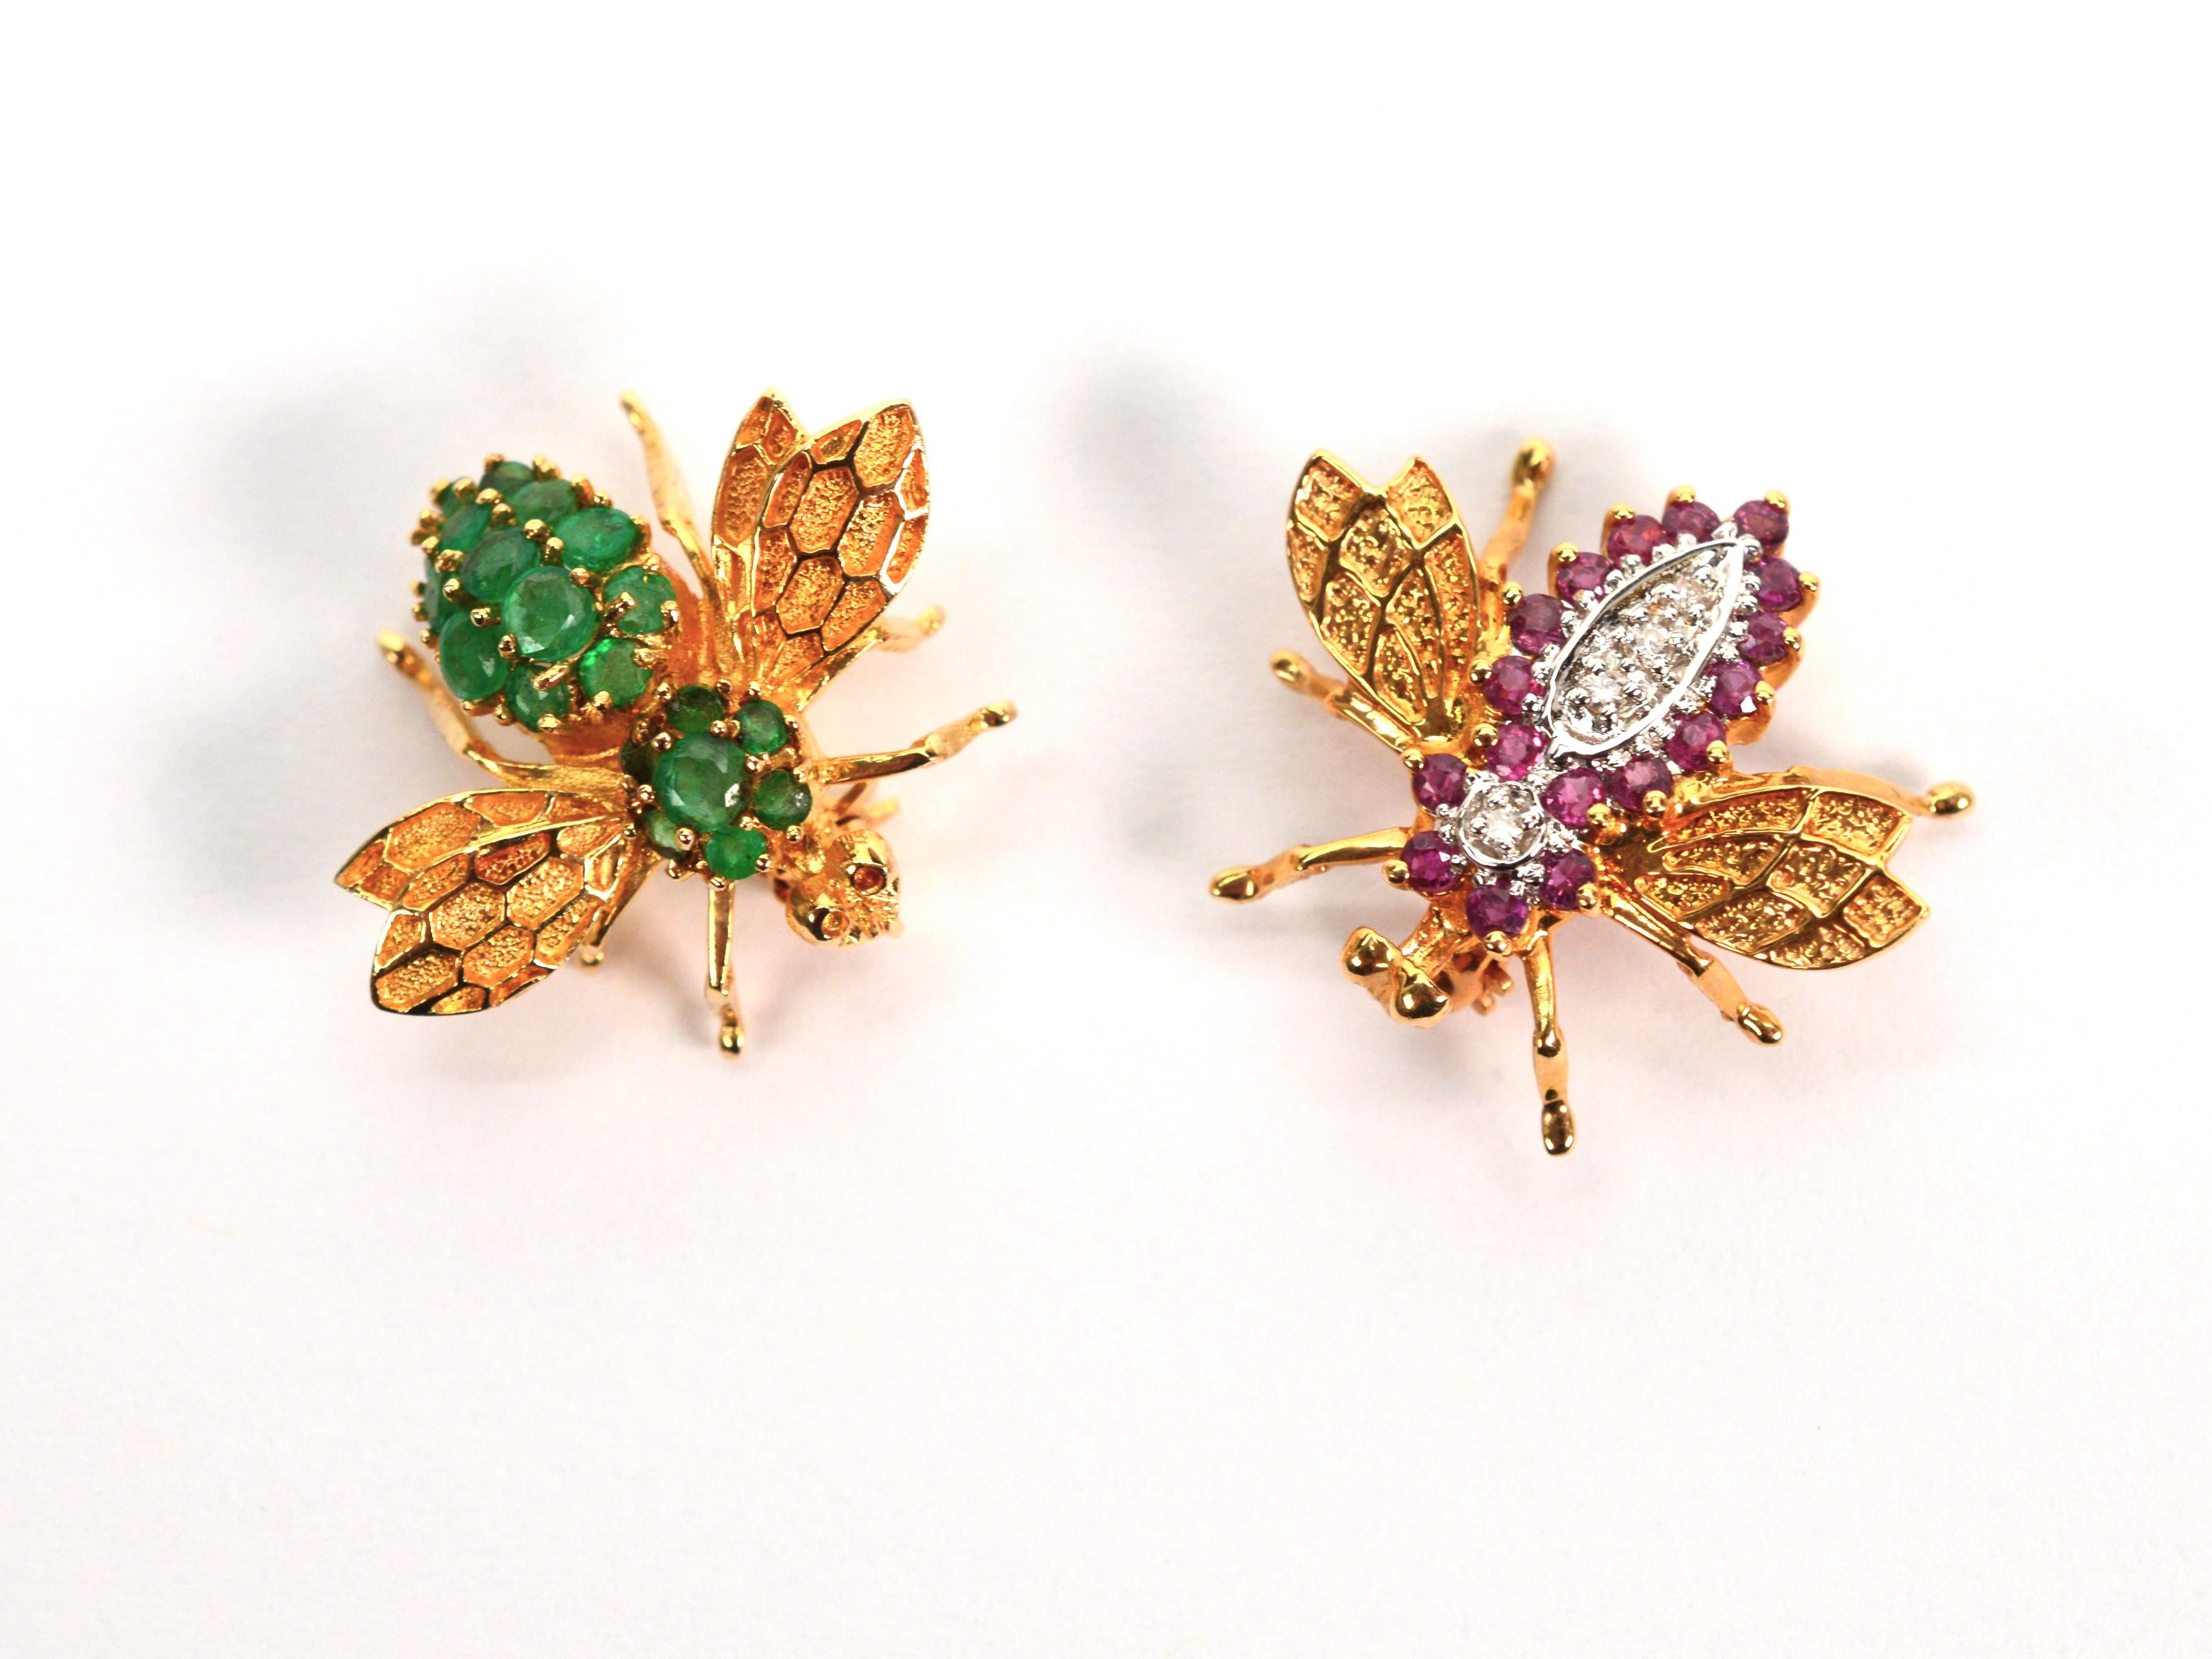 Jeweled 14 Karat Gold Bee Pin Duo In Excellent Condition For Sale In Mount Kisco, NY